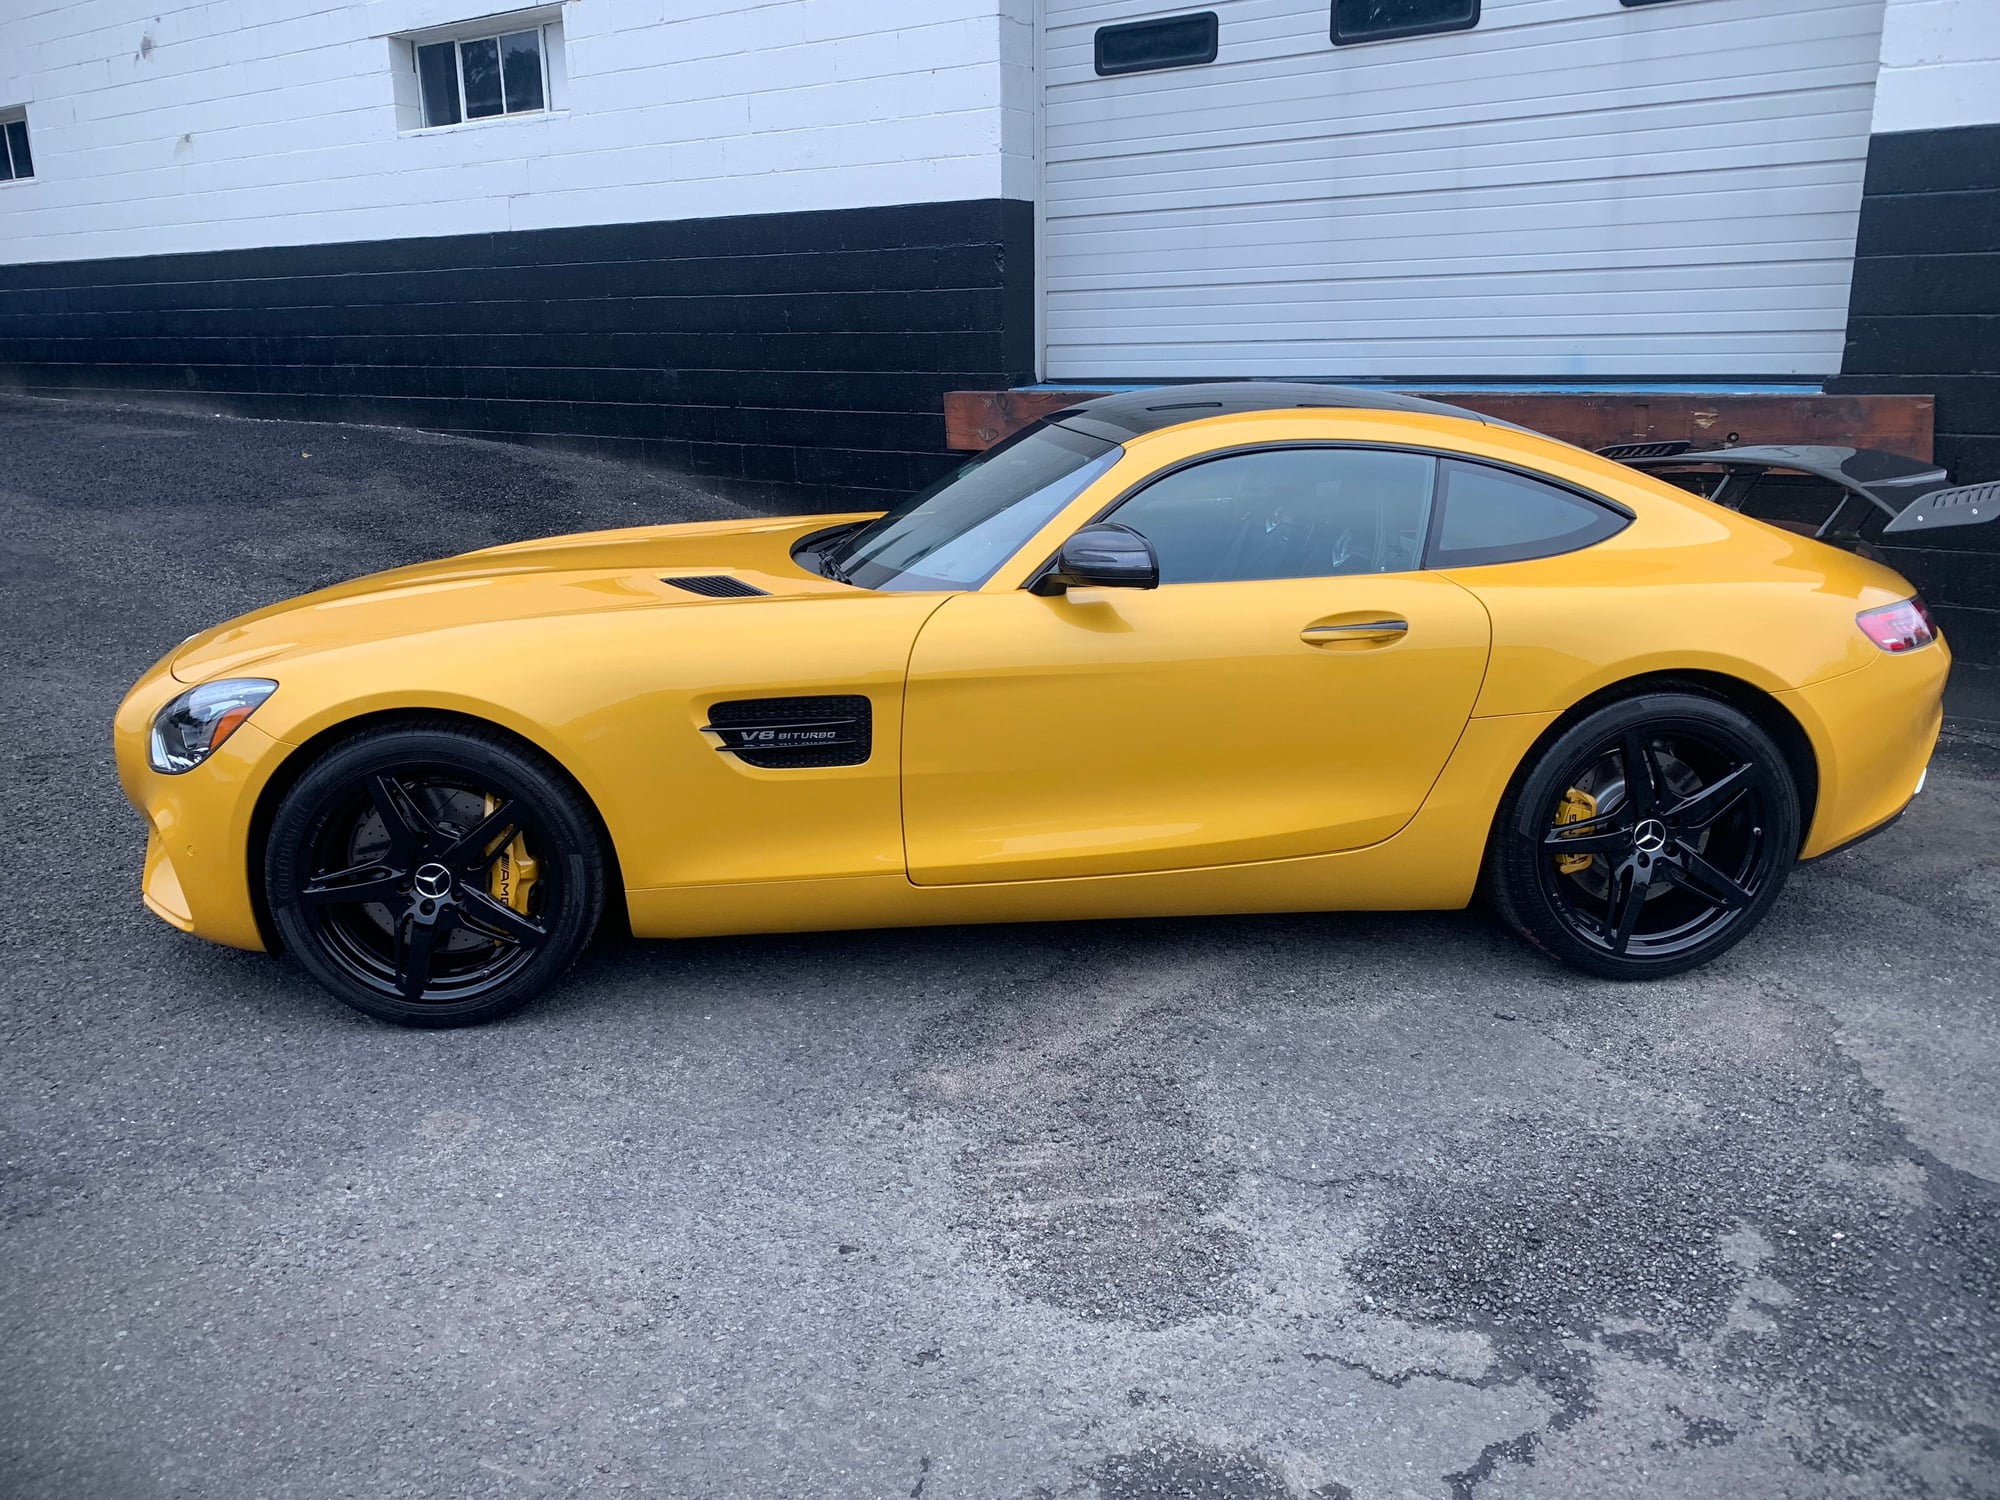 2017 Mercedes-Benz AMG GT - 17 AMG GT  Solarbeam Yellow  only 3500 miles   MSRP $141k  nicely optioned - Used - VIN WDDYJ7HA8HA012043 - 3,500 Miles - 8 cyl - 2WD - Automatic - Coupe - Other - Shelton, CT 06484, United States